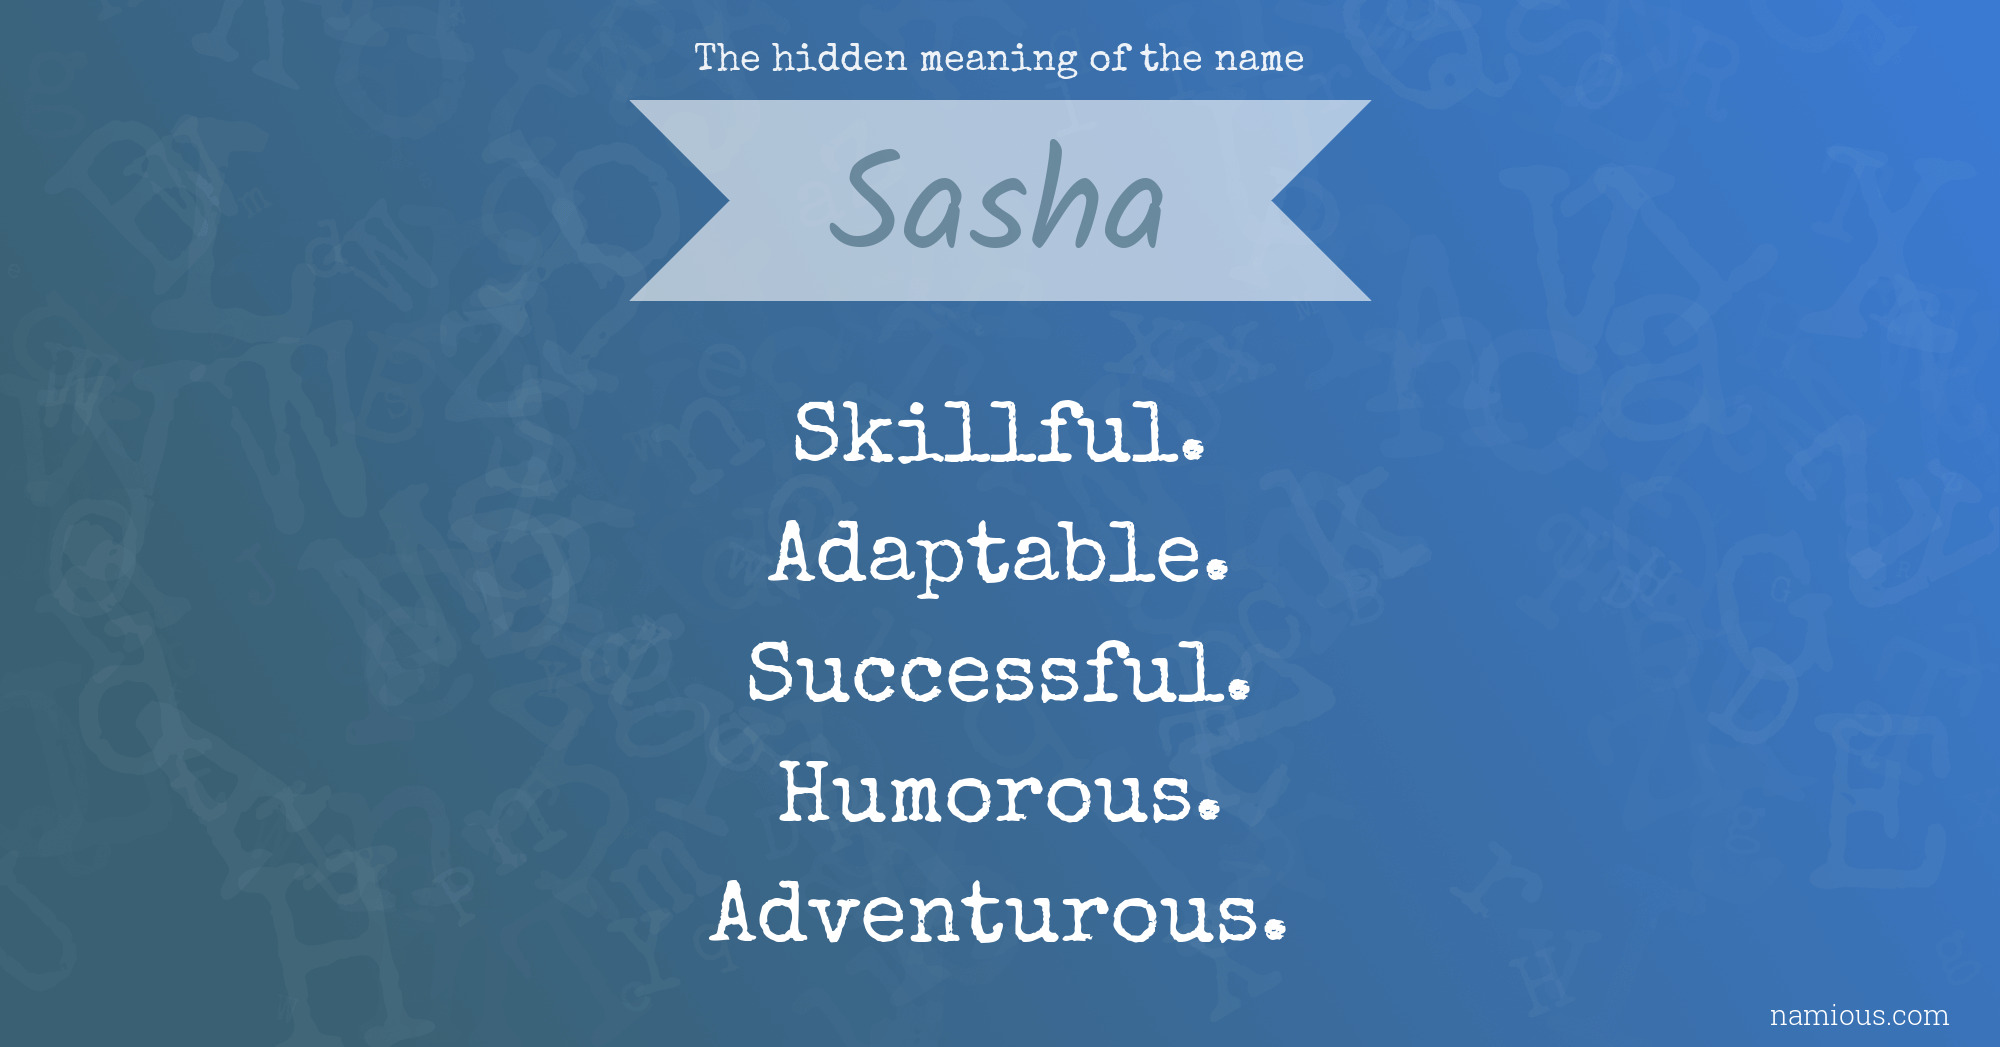 The hidden meaning of the name Sasha